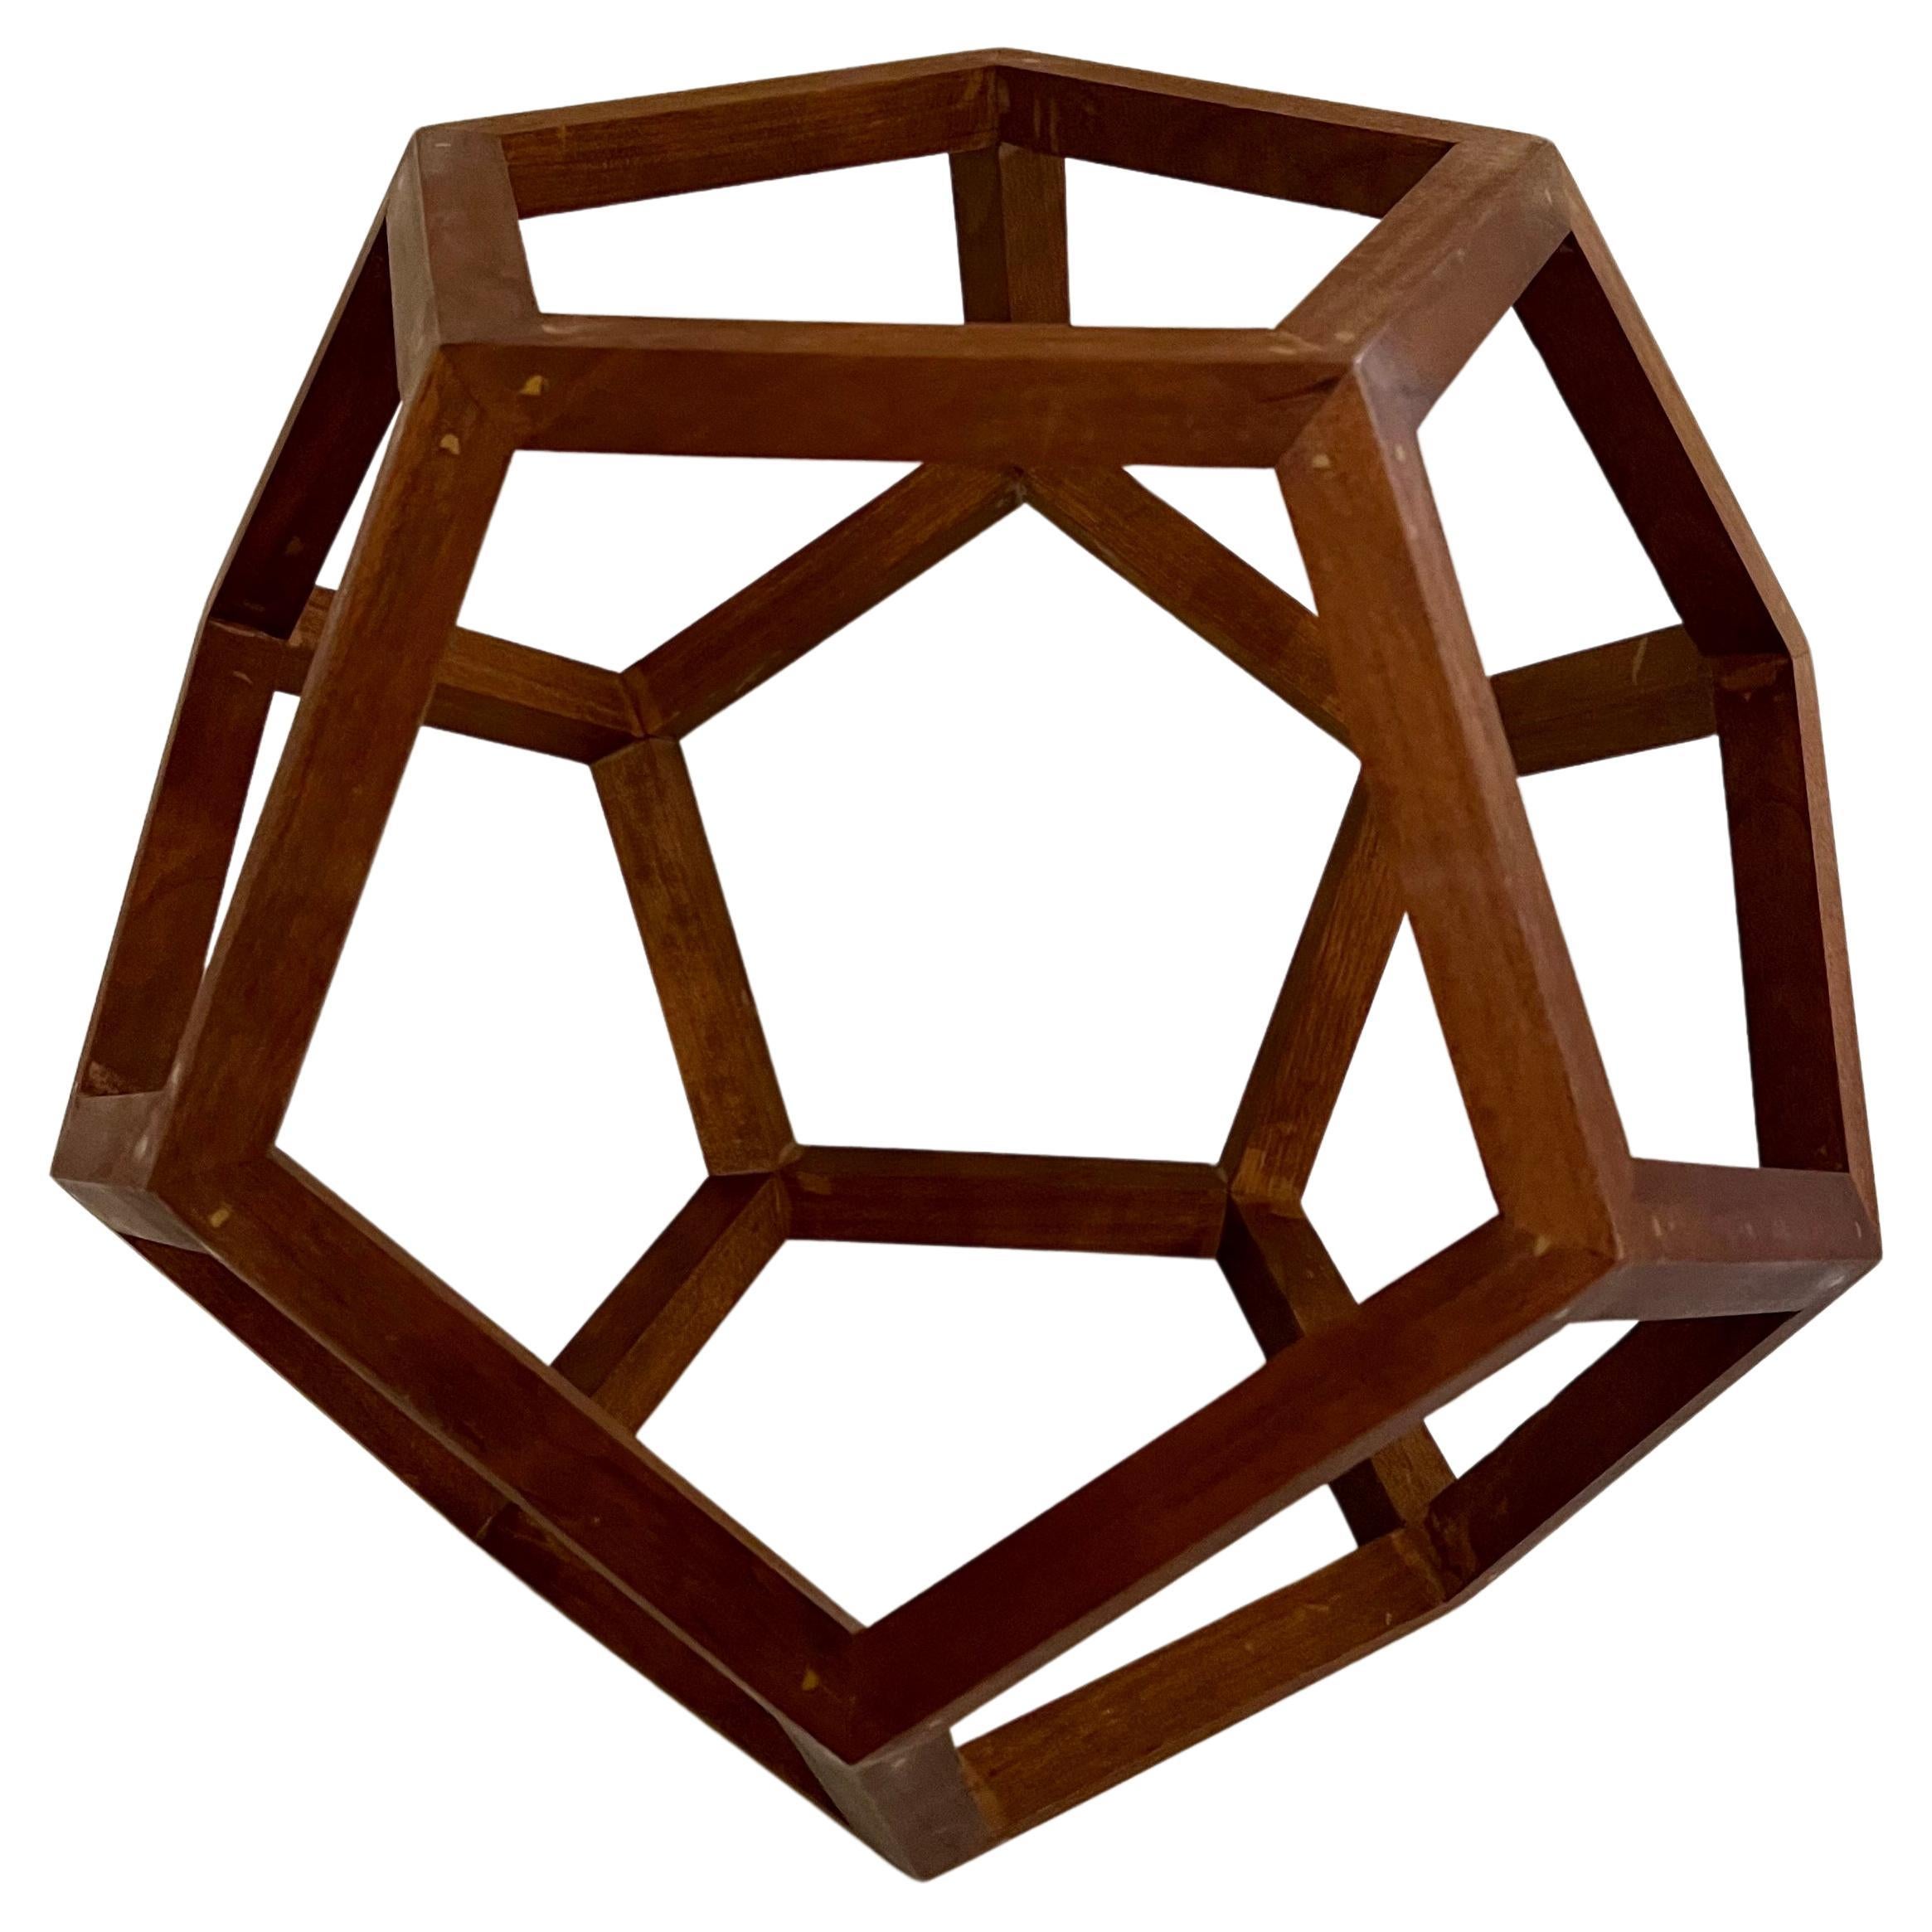 Beautiful incredible craftsmanship geometric sculpture all hand made an put together, circa 1970's excellent condition in the style of artist Ai Weiwei.